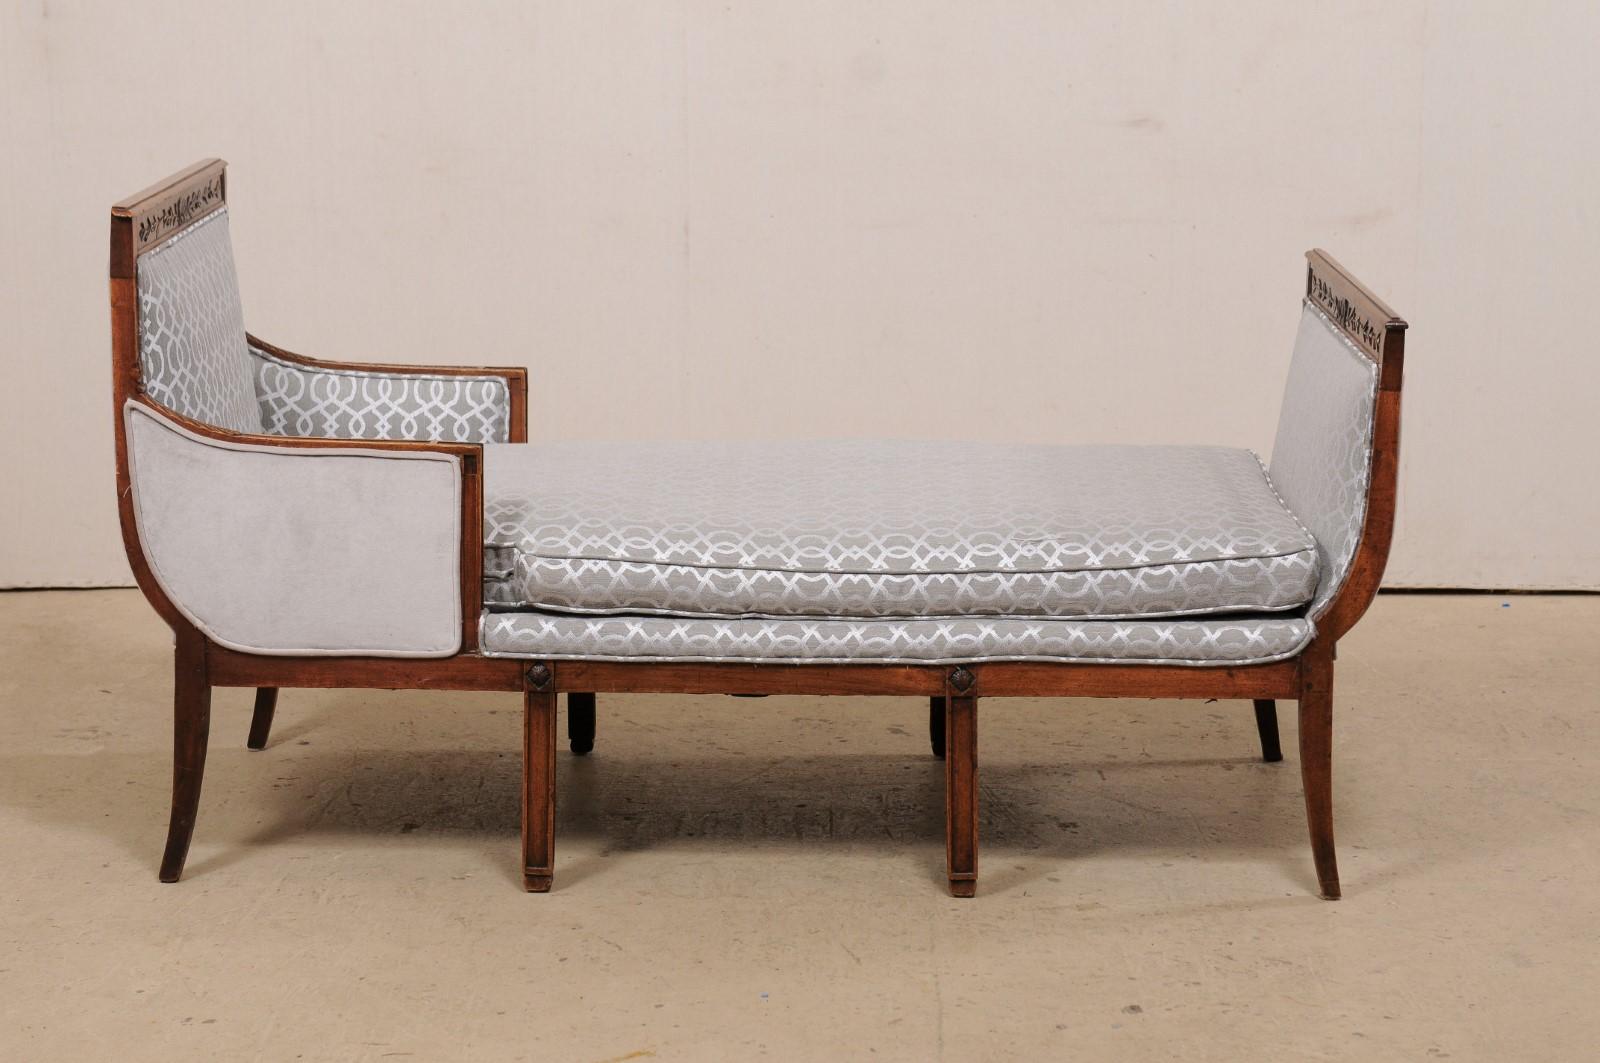 An Elegant French Duchesse en Bateau (Chaise) Newly Upholstered, 19th Century For Sale 1